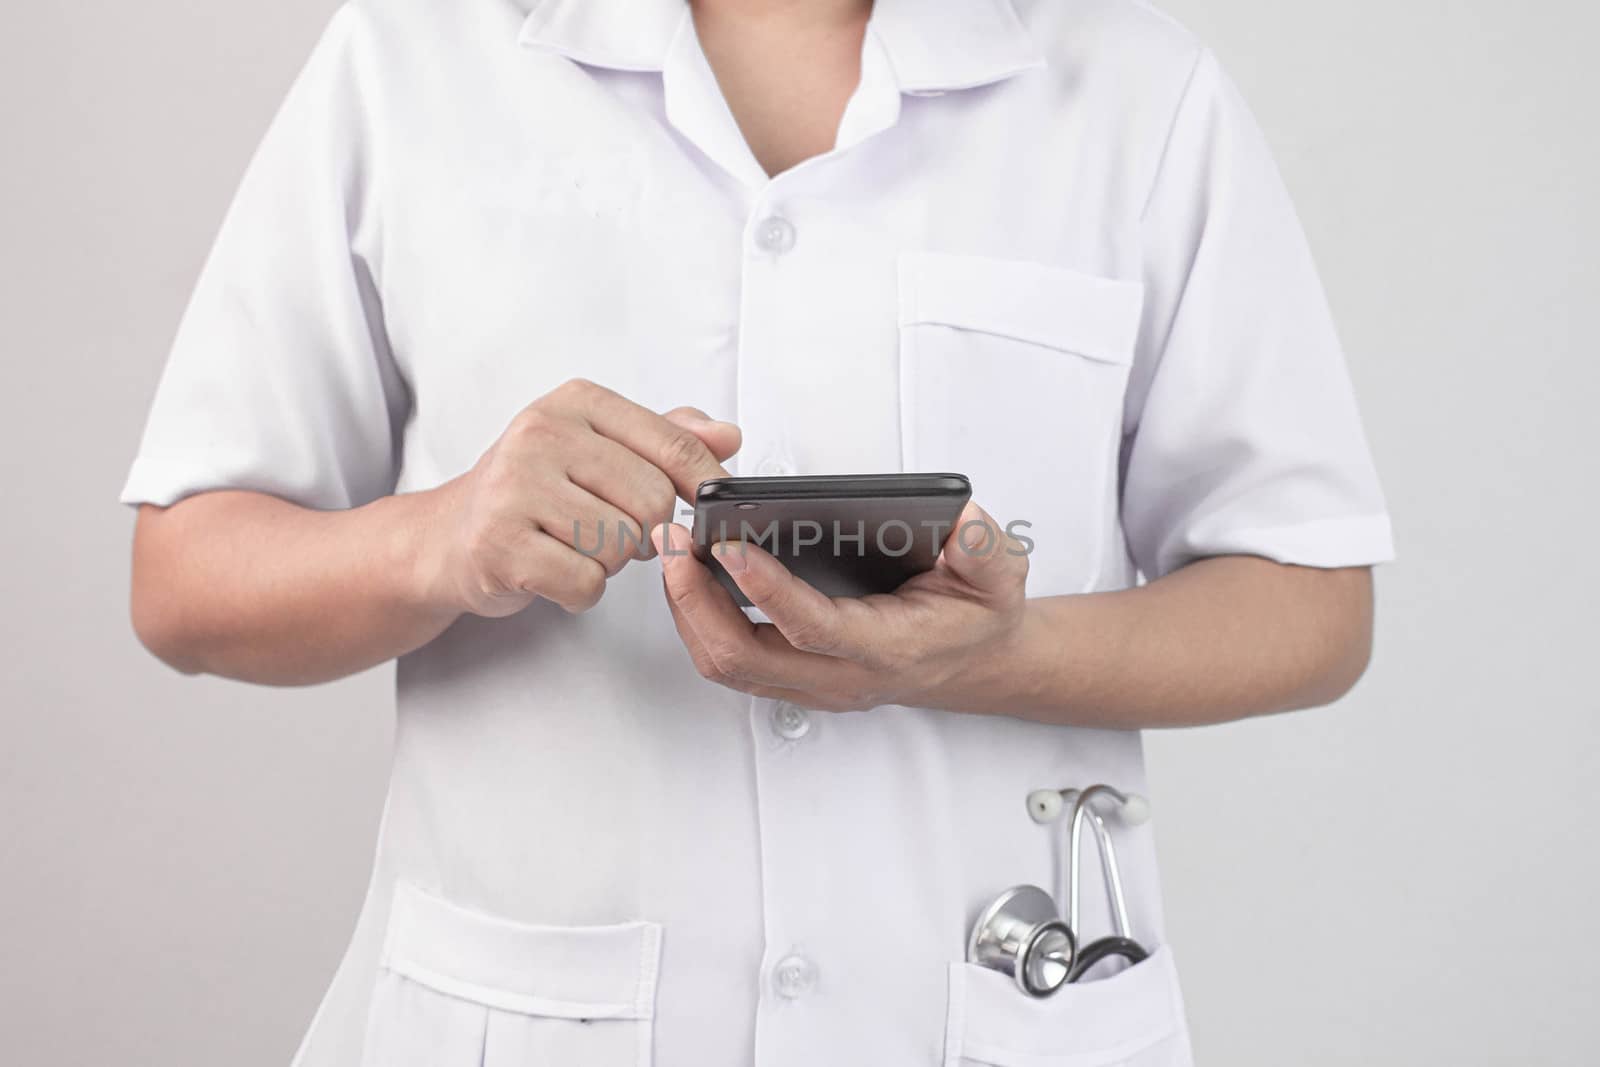 Confident young woman doctor using smartphone with stethoscope i by TEERASAK